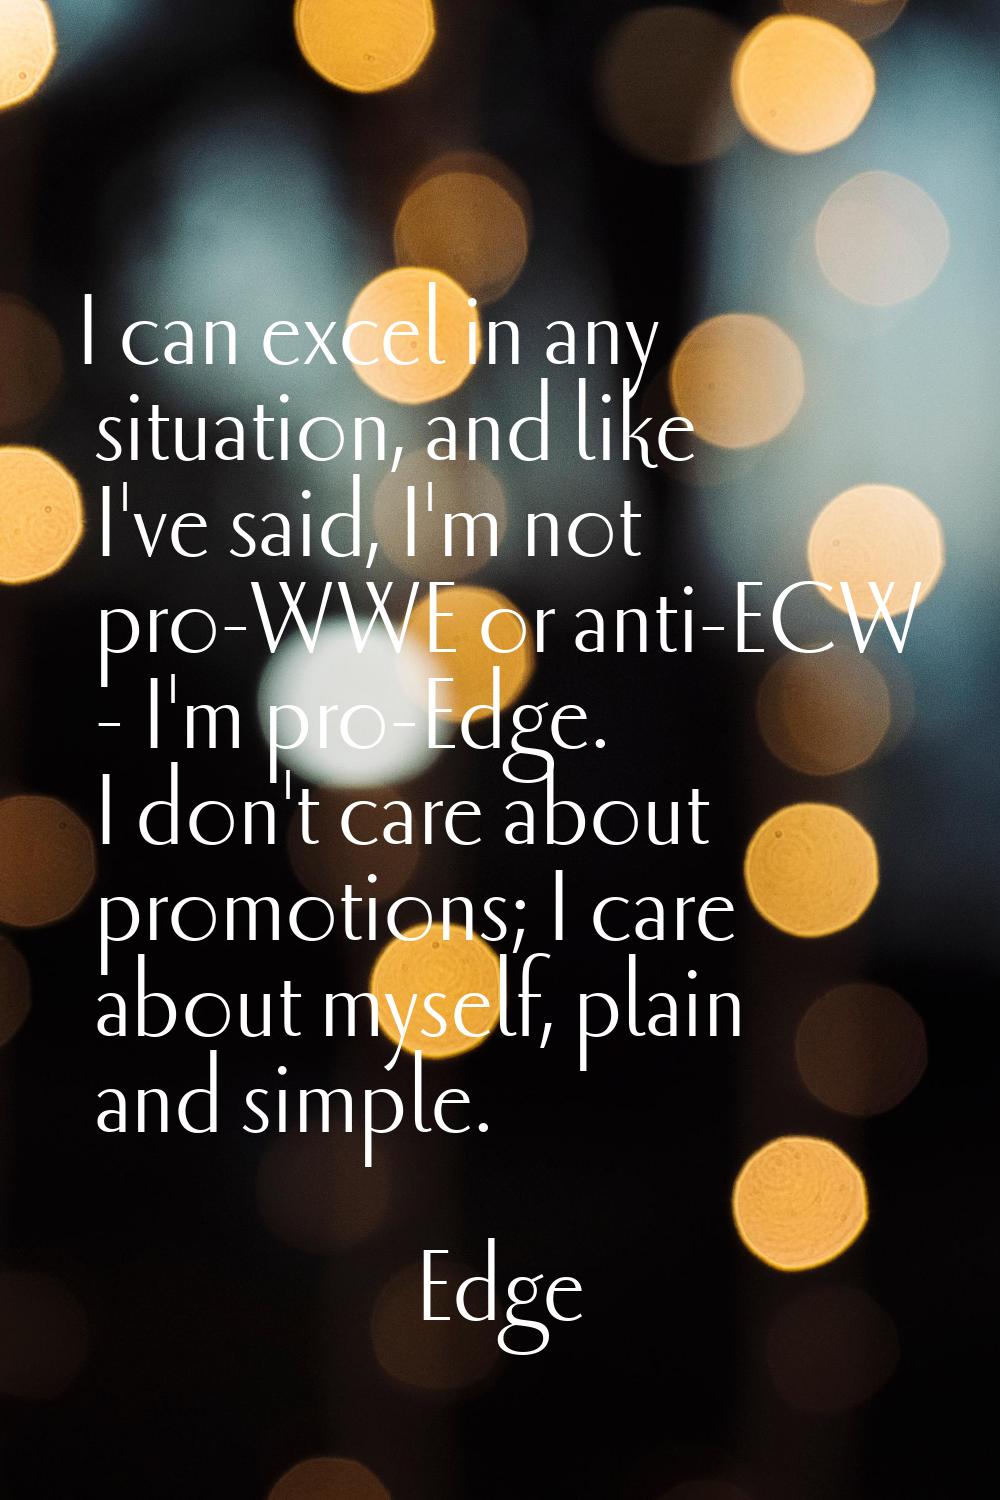 I can excel in any situation, and like I've said, I'm not pro-WWE or anti-ECW - I'm pro-Edge. I don